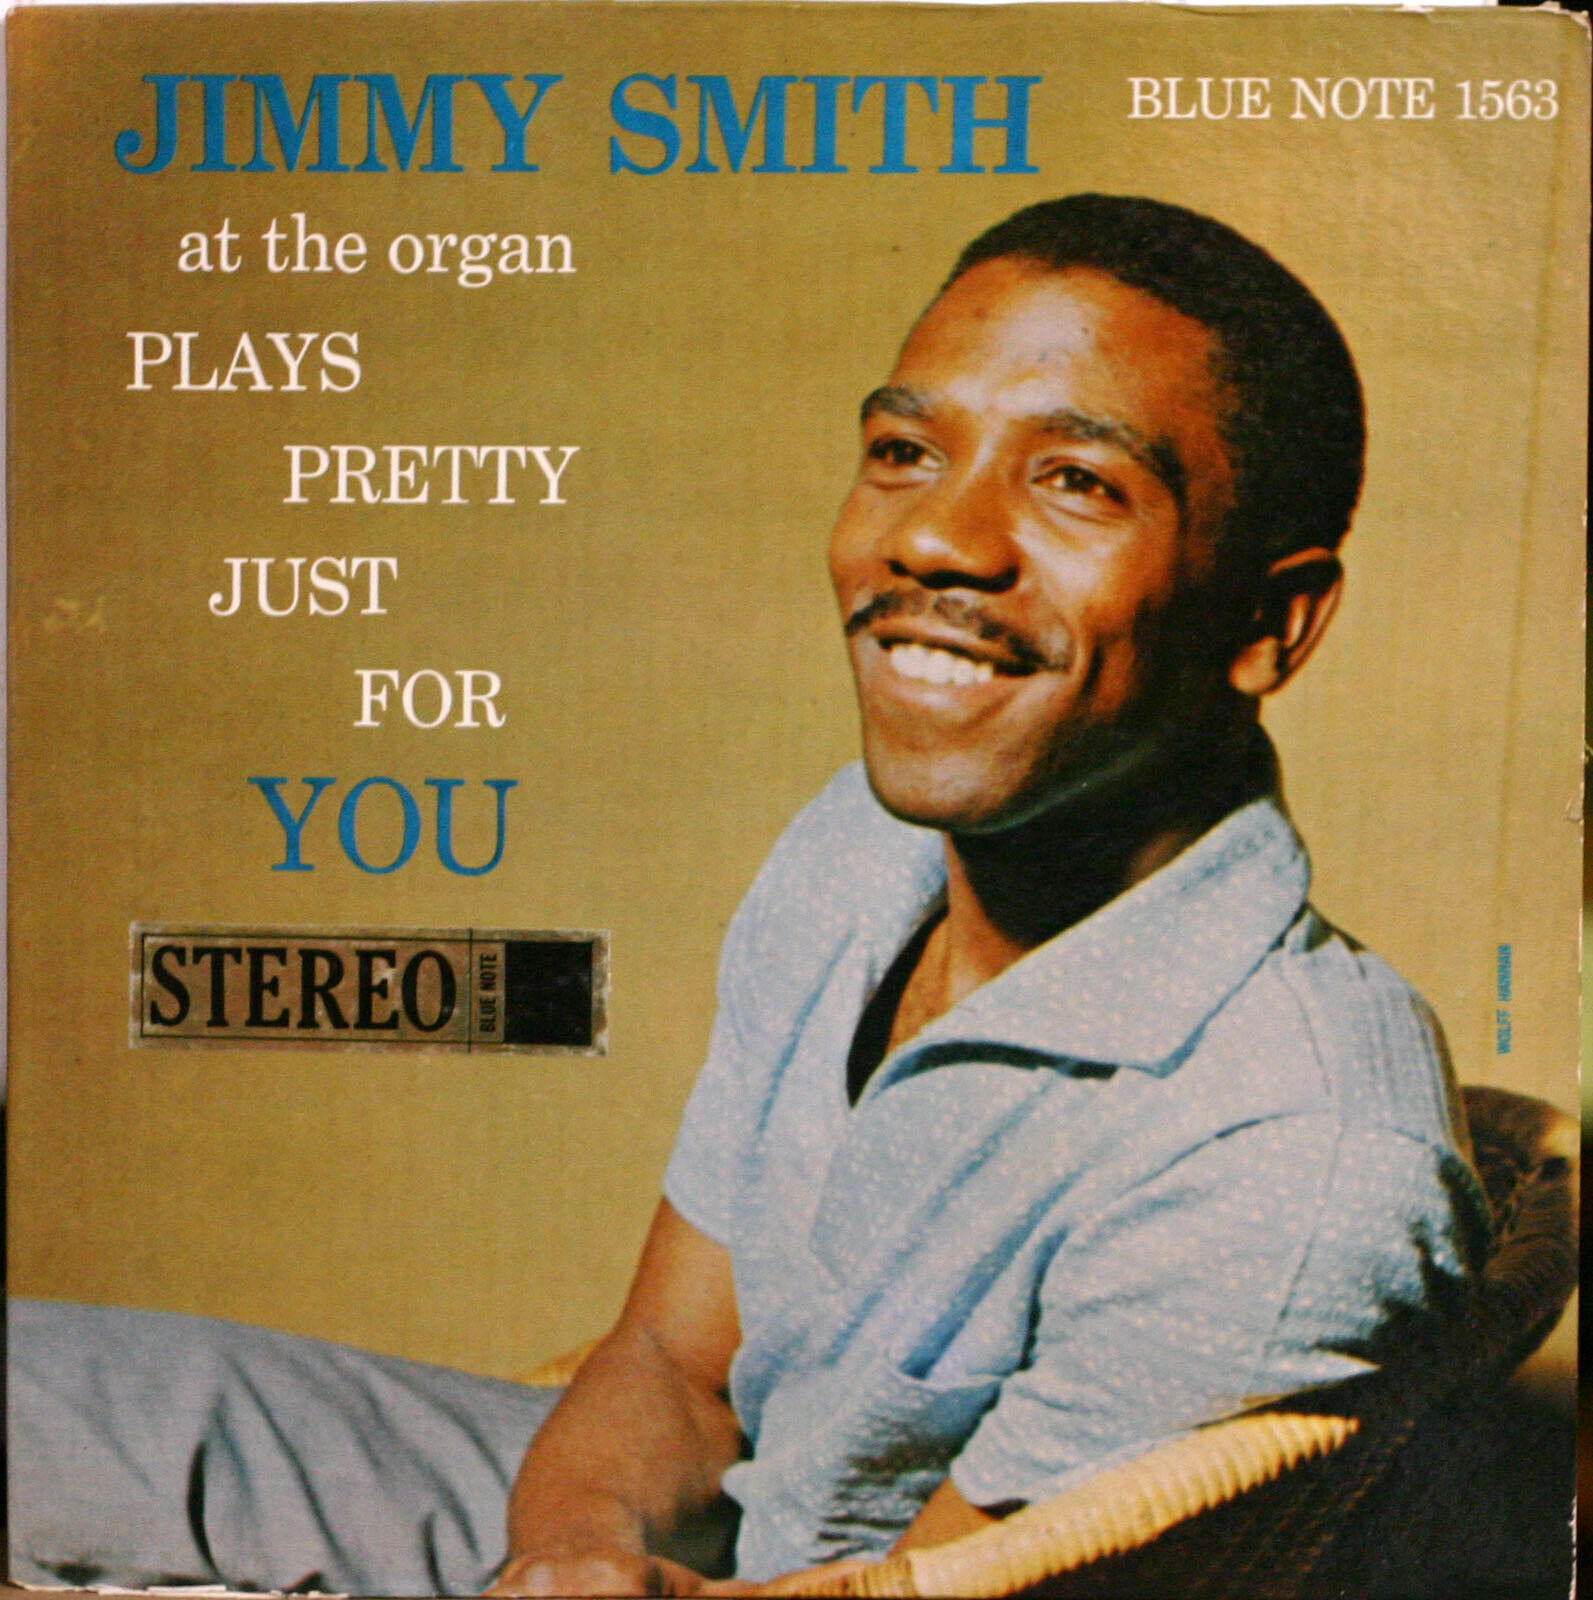 JIMMY SMITH Plays Pretty Just For You Blue Note BST 1563 RVG JAZZ 1959 33RPM